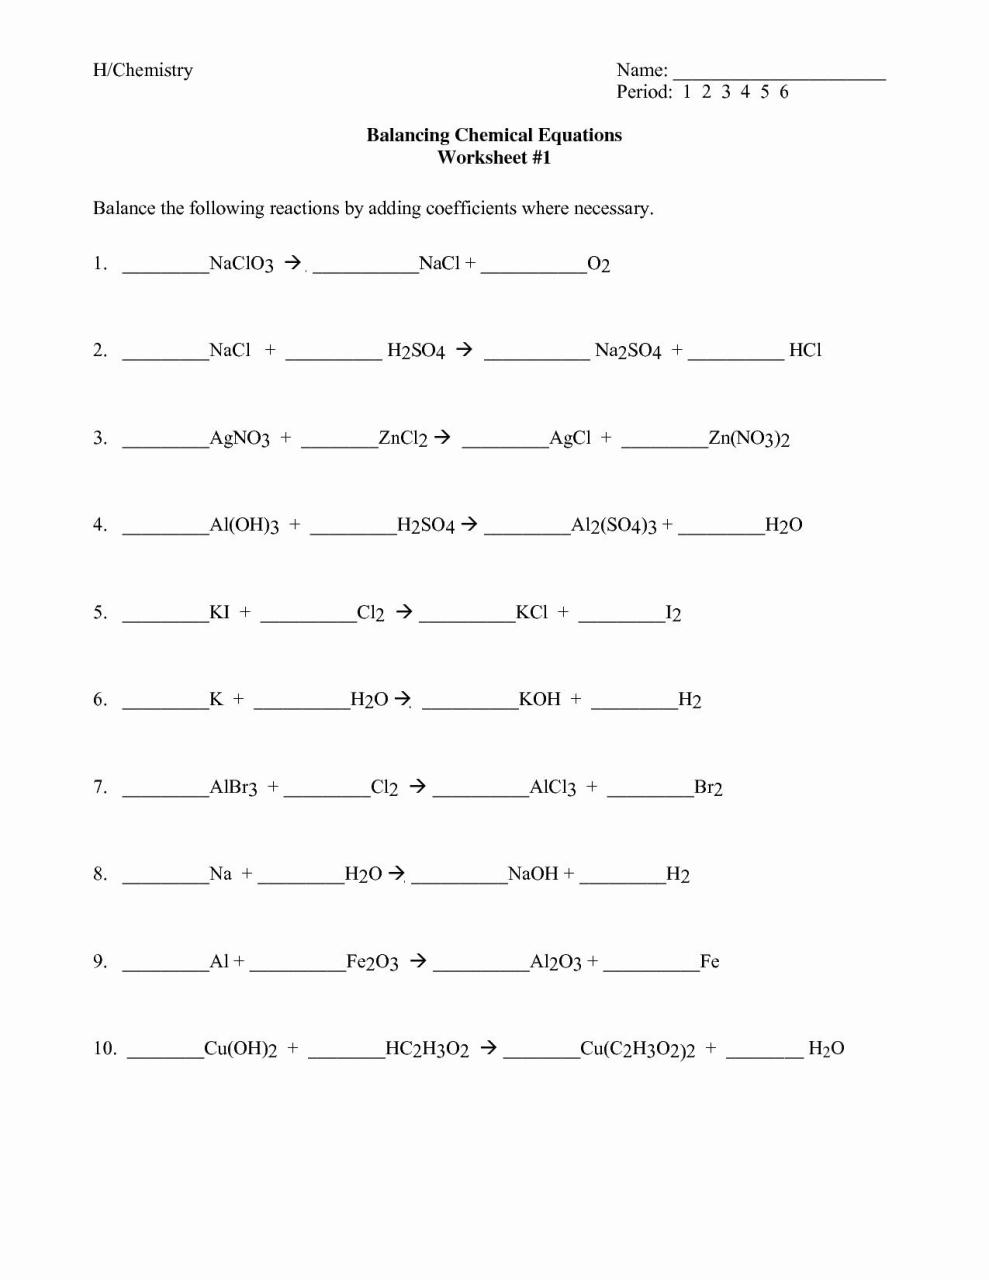 Balancing Chemical Equations Practice Worksheet with Answers